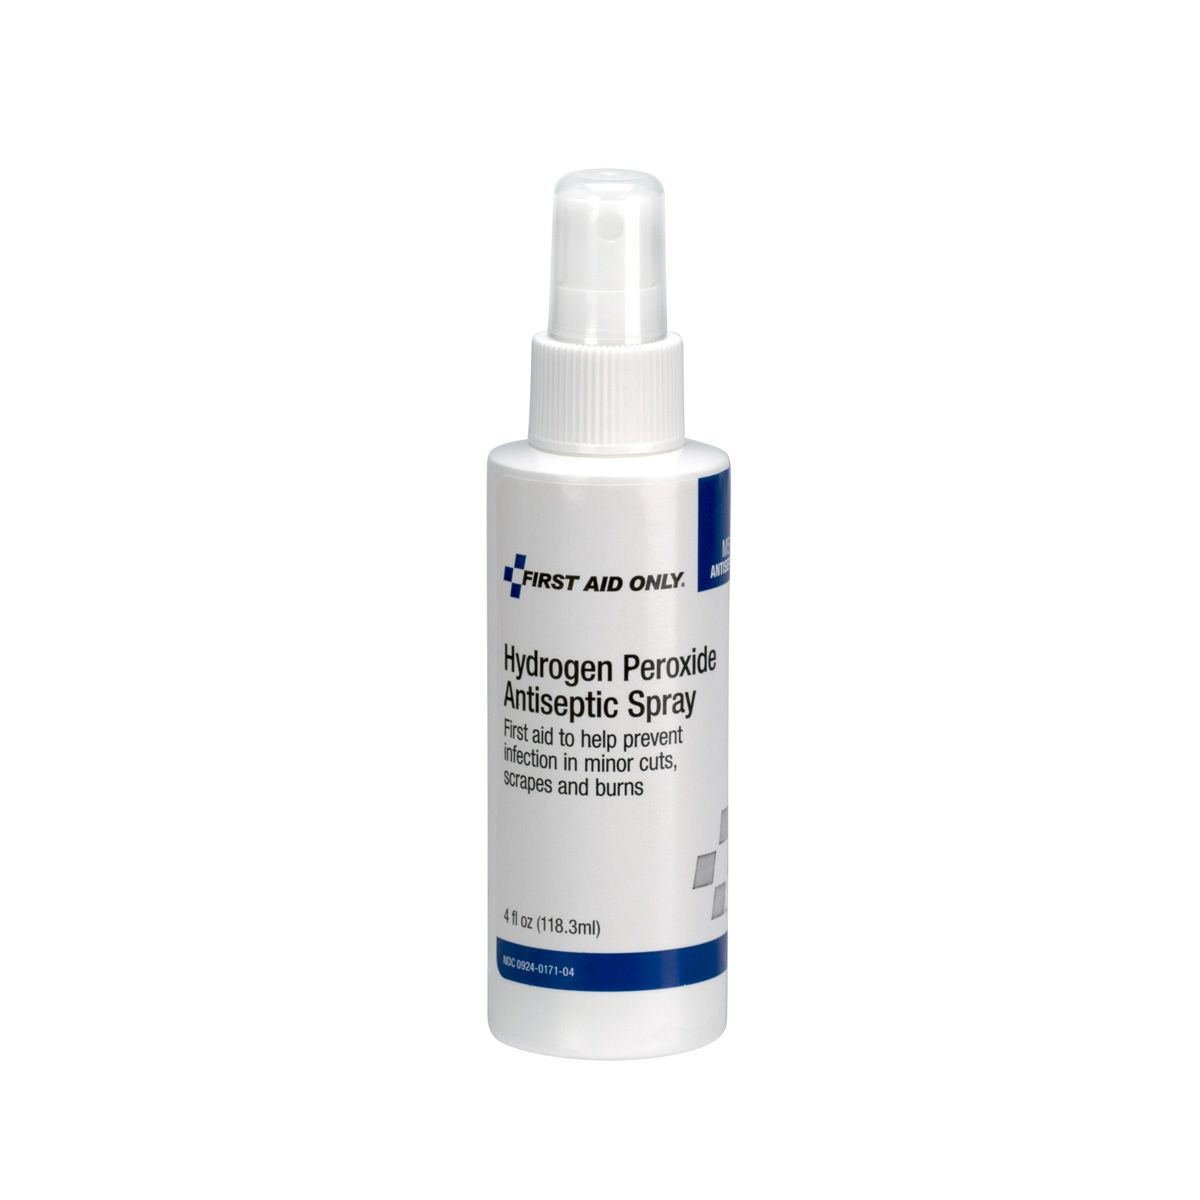 HYDROGEN PEROXIDE SPRAY 4 OZ - Ointments and Antiseptics